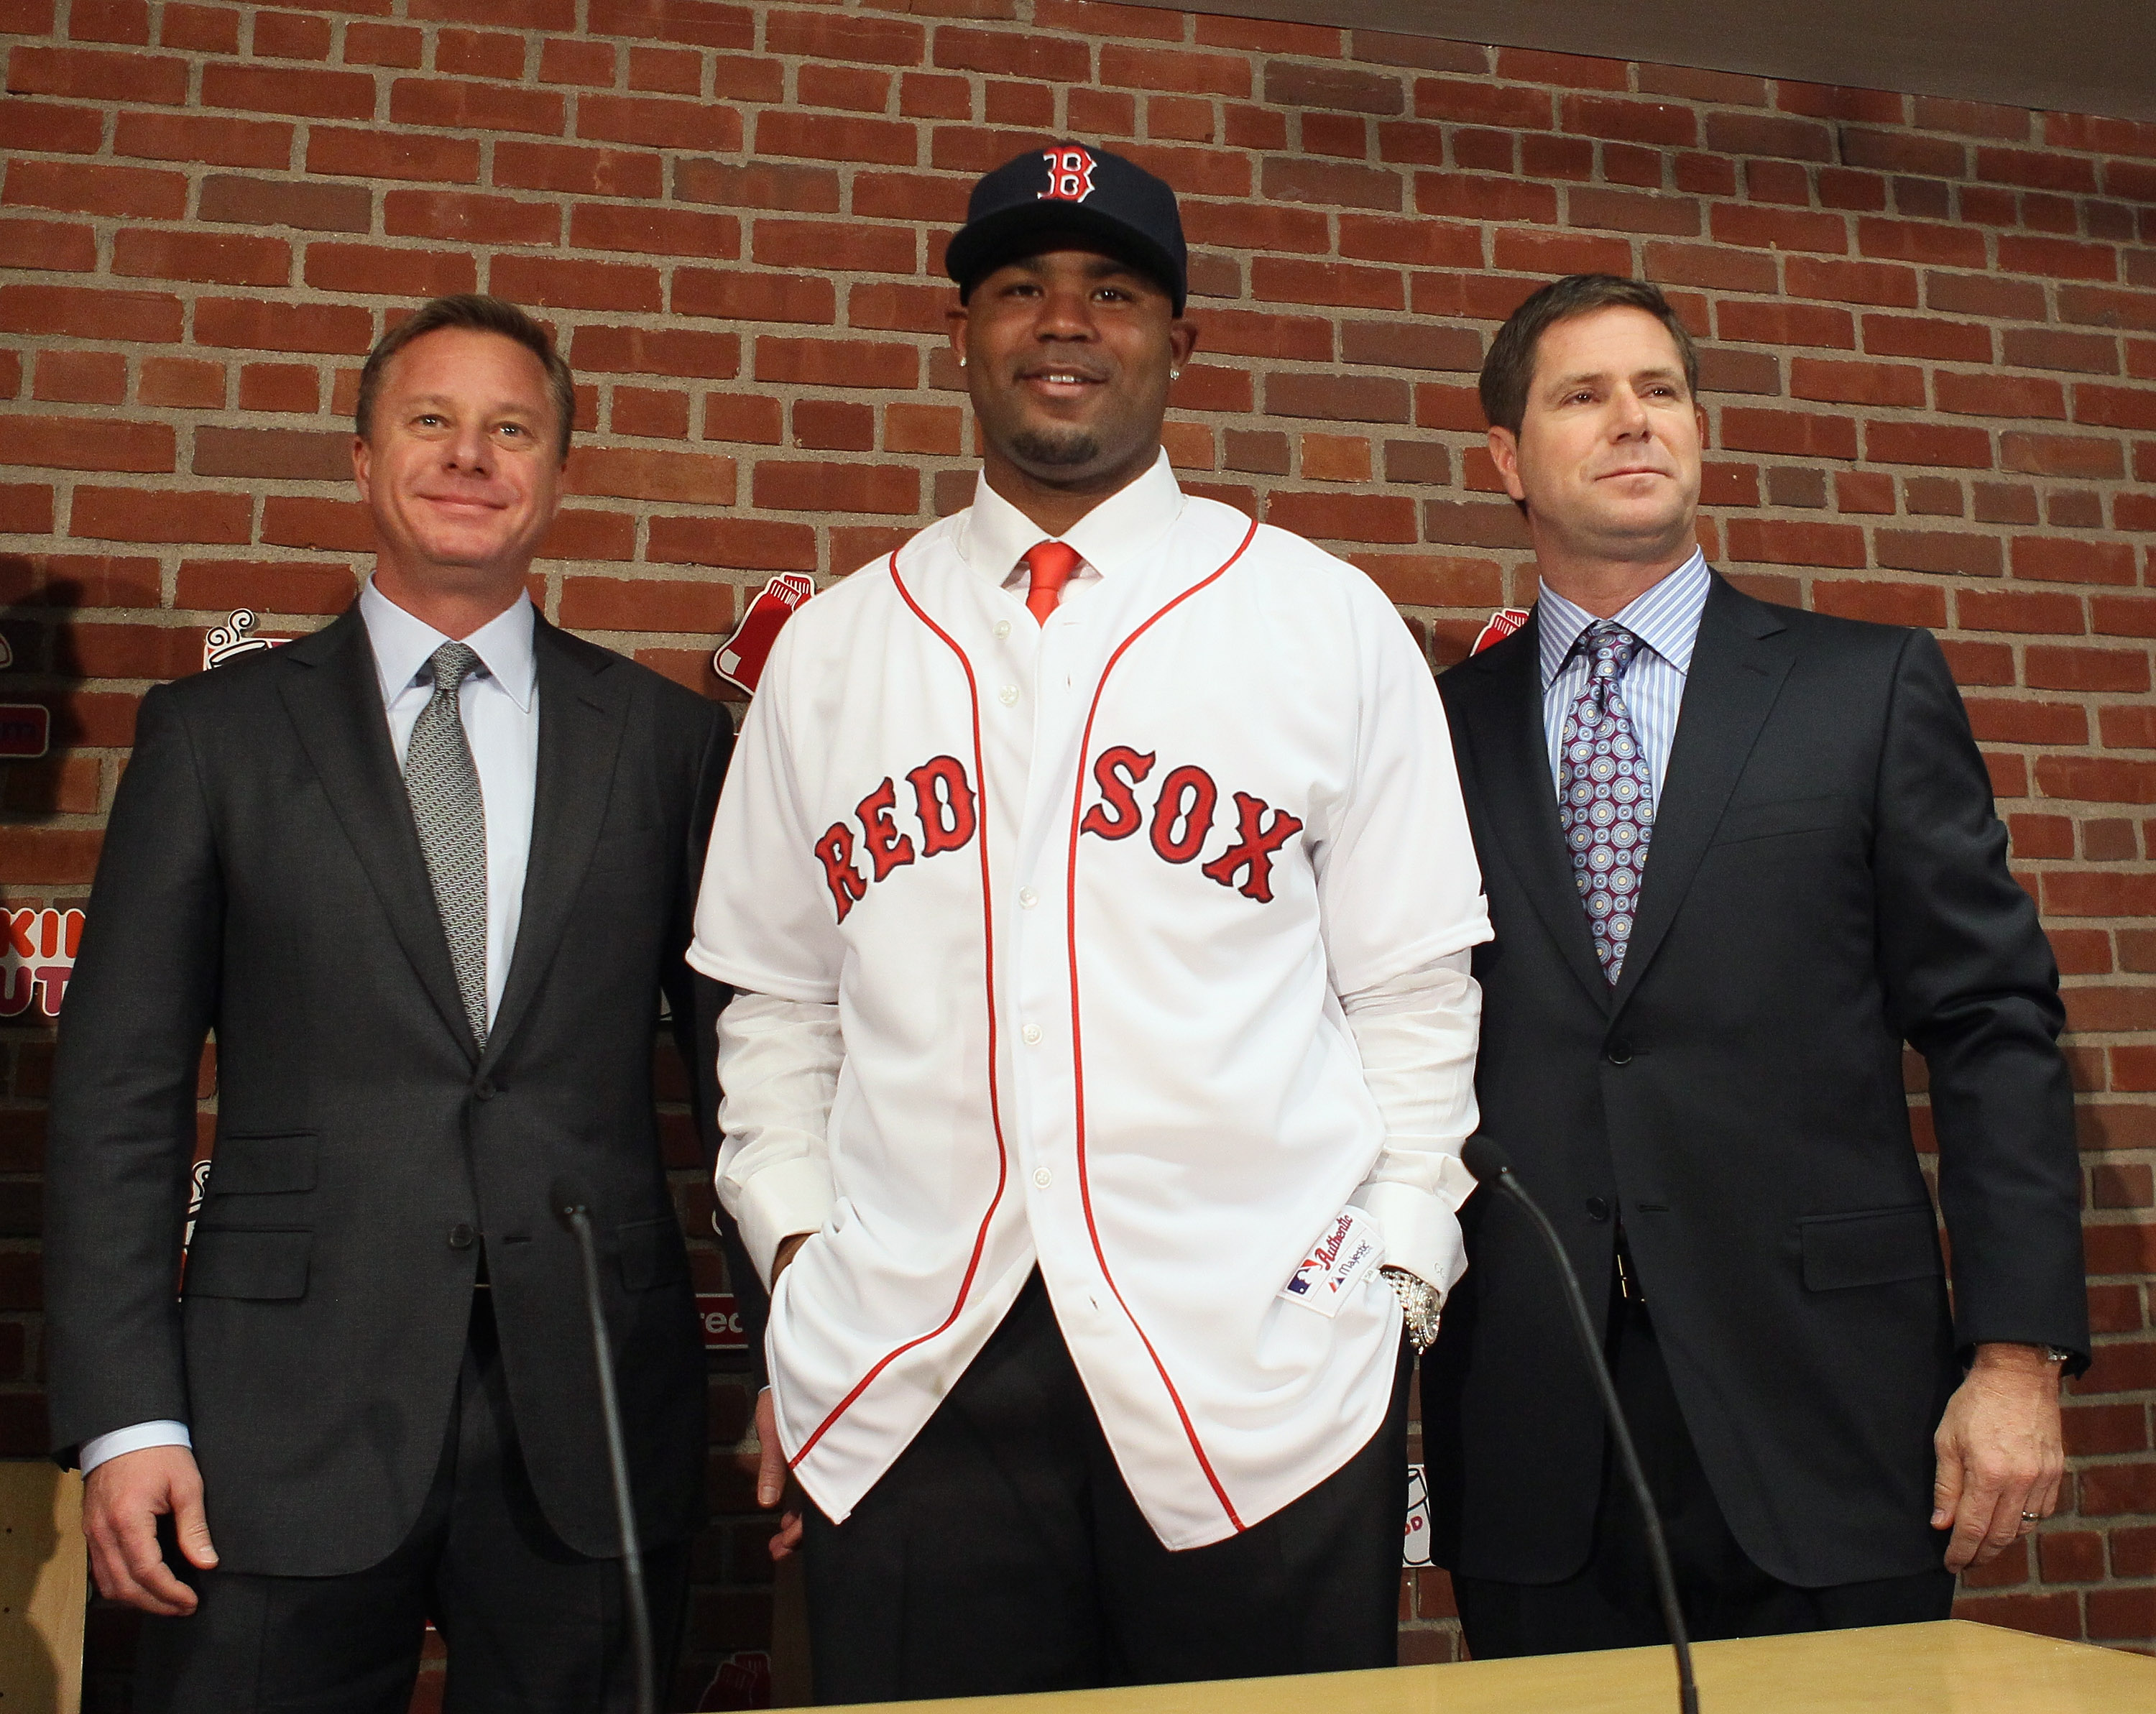 BOSTON, MA - DECEMBER 11:  Carl Crawford poses with his agents during a press conference announcing his signing with the Boston Red Sox on December 11,  2010 at the Fenway Park in Boston, Massachusetts.  (Photo by Elsa/Getty Images)